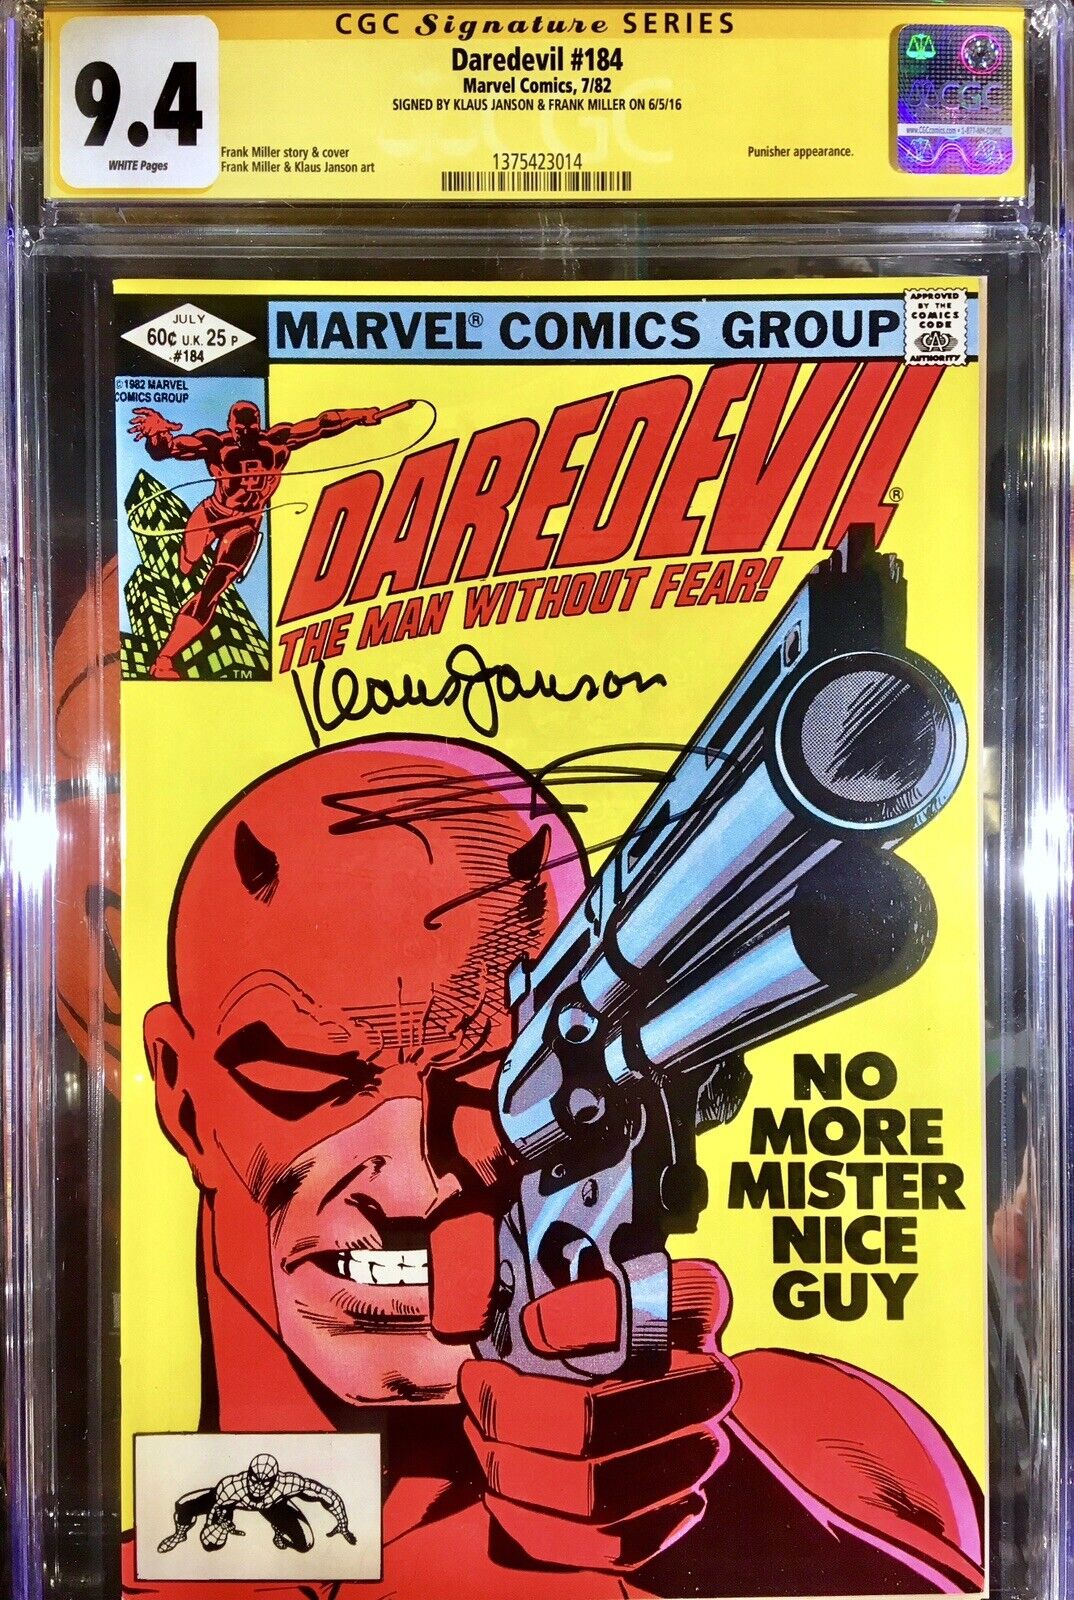 Daredevil #184 CGC SS 9.4 Signed By Frank Miller & Klaus Janson White Pages